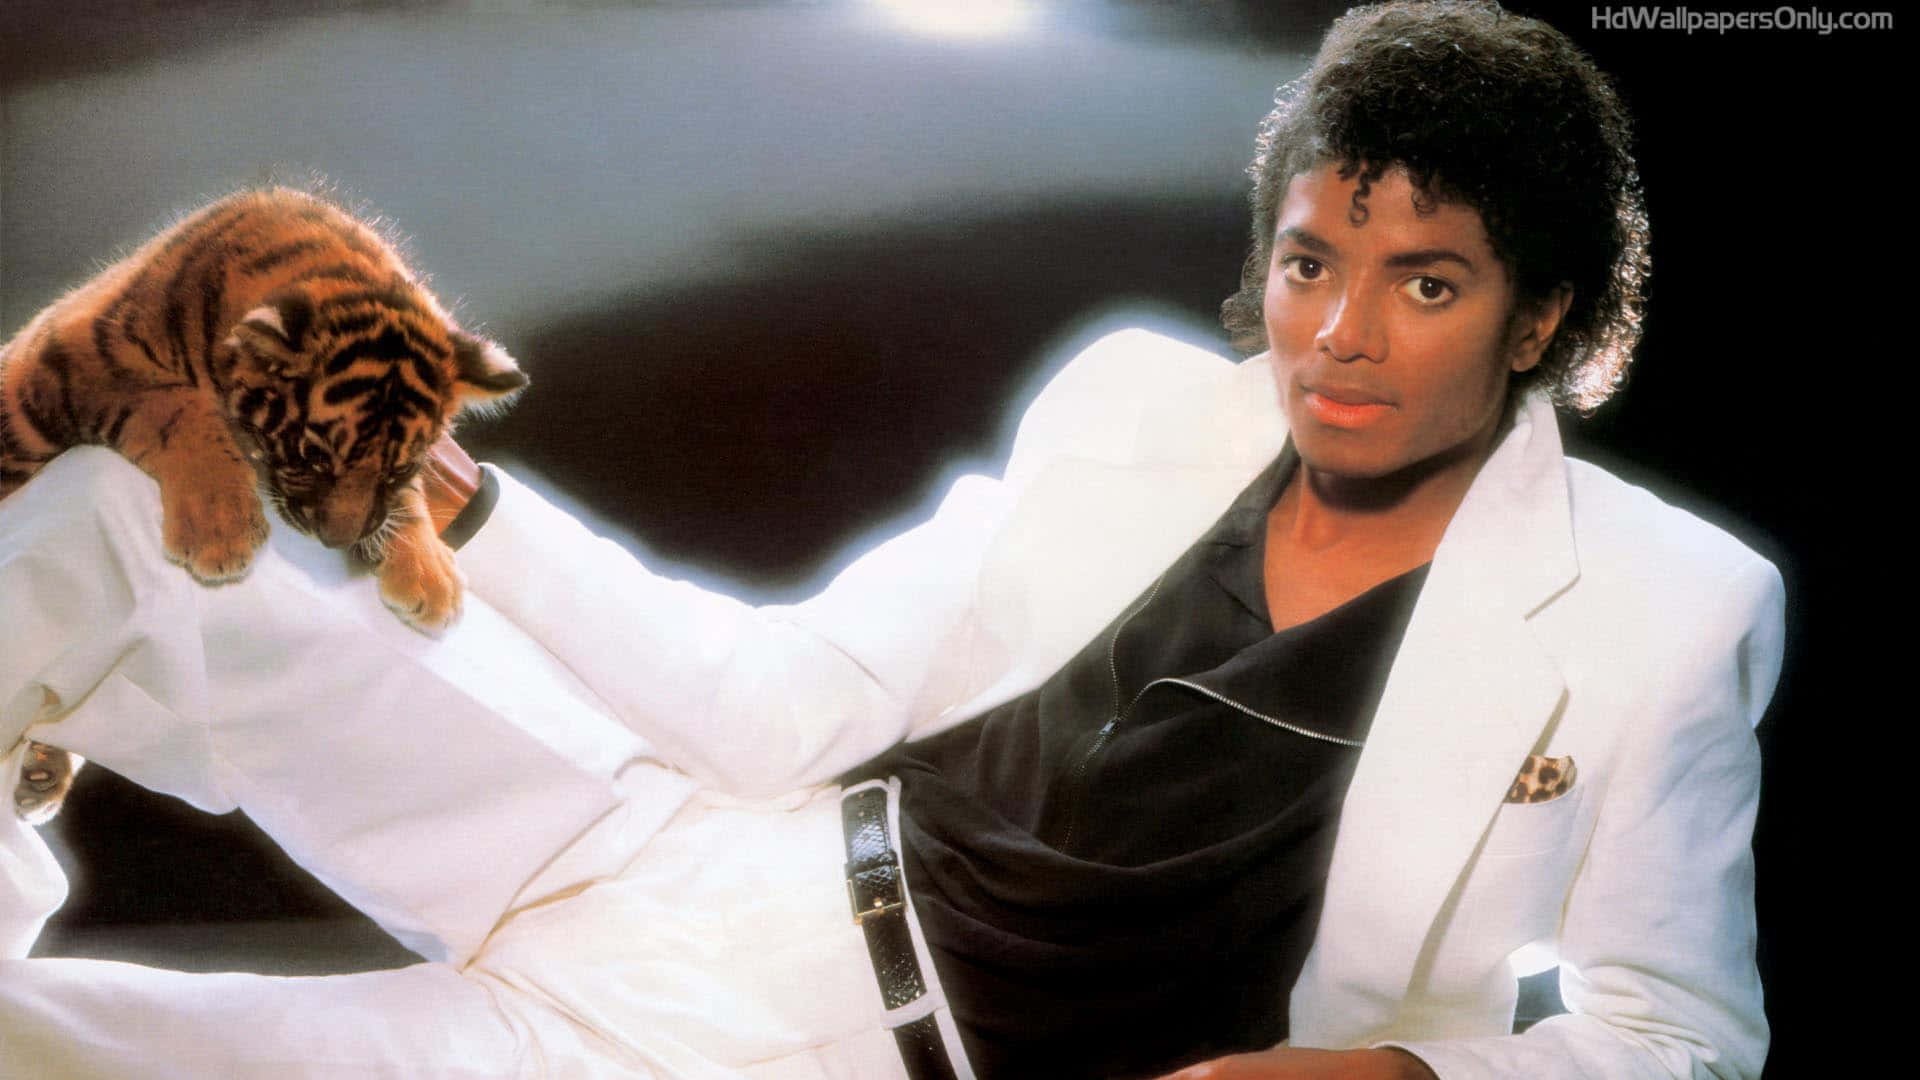 Michael Jackson in the Iconic Thriller Movie Wallpaper